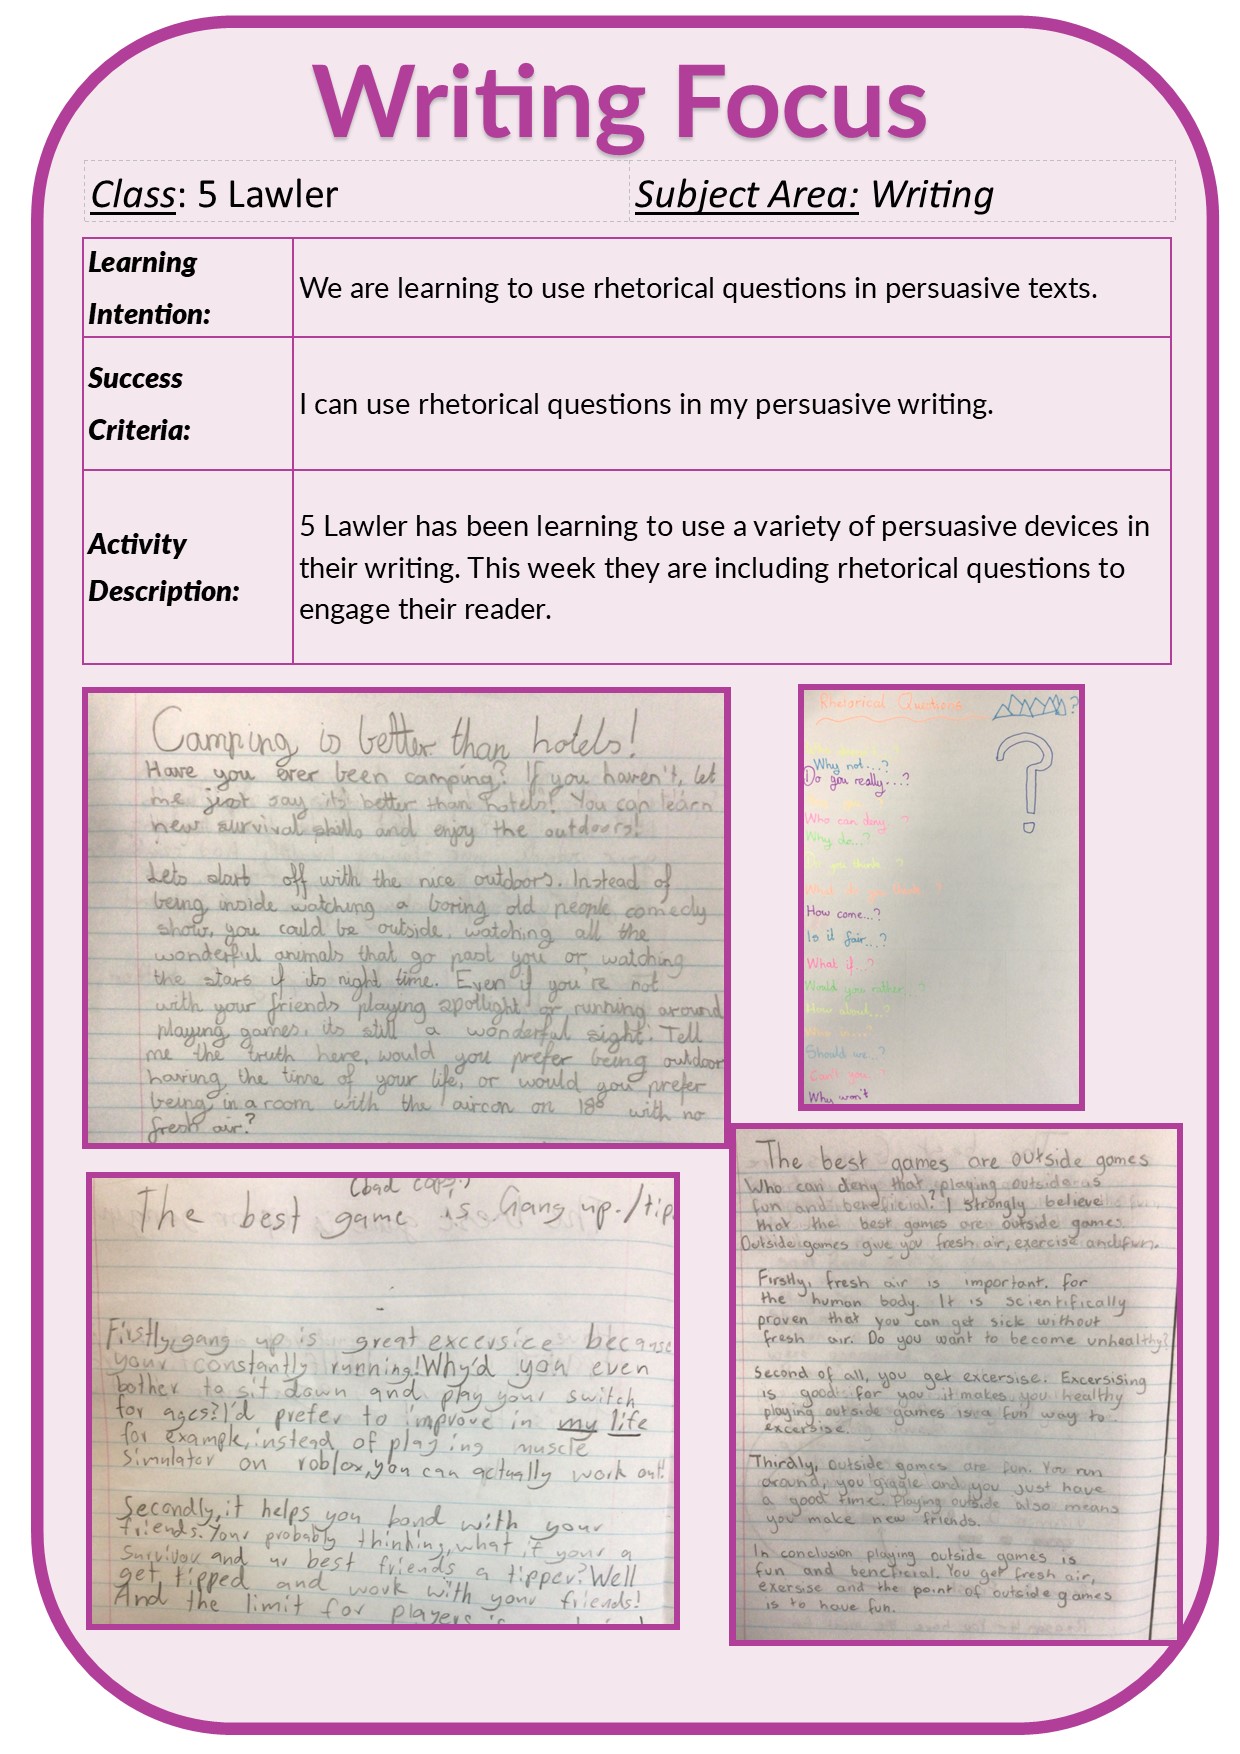 Visible Learning/5L Writing Term 1 Week 10.jpg